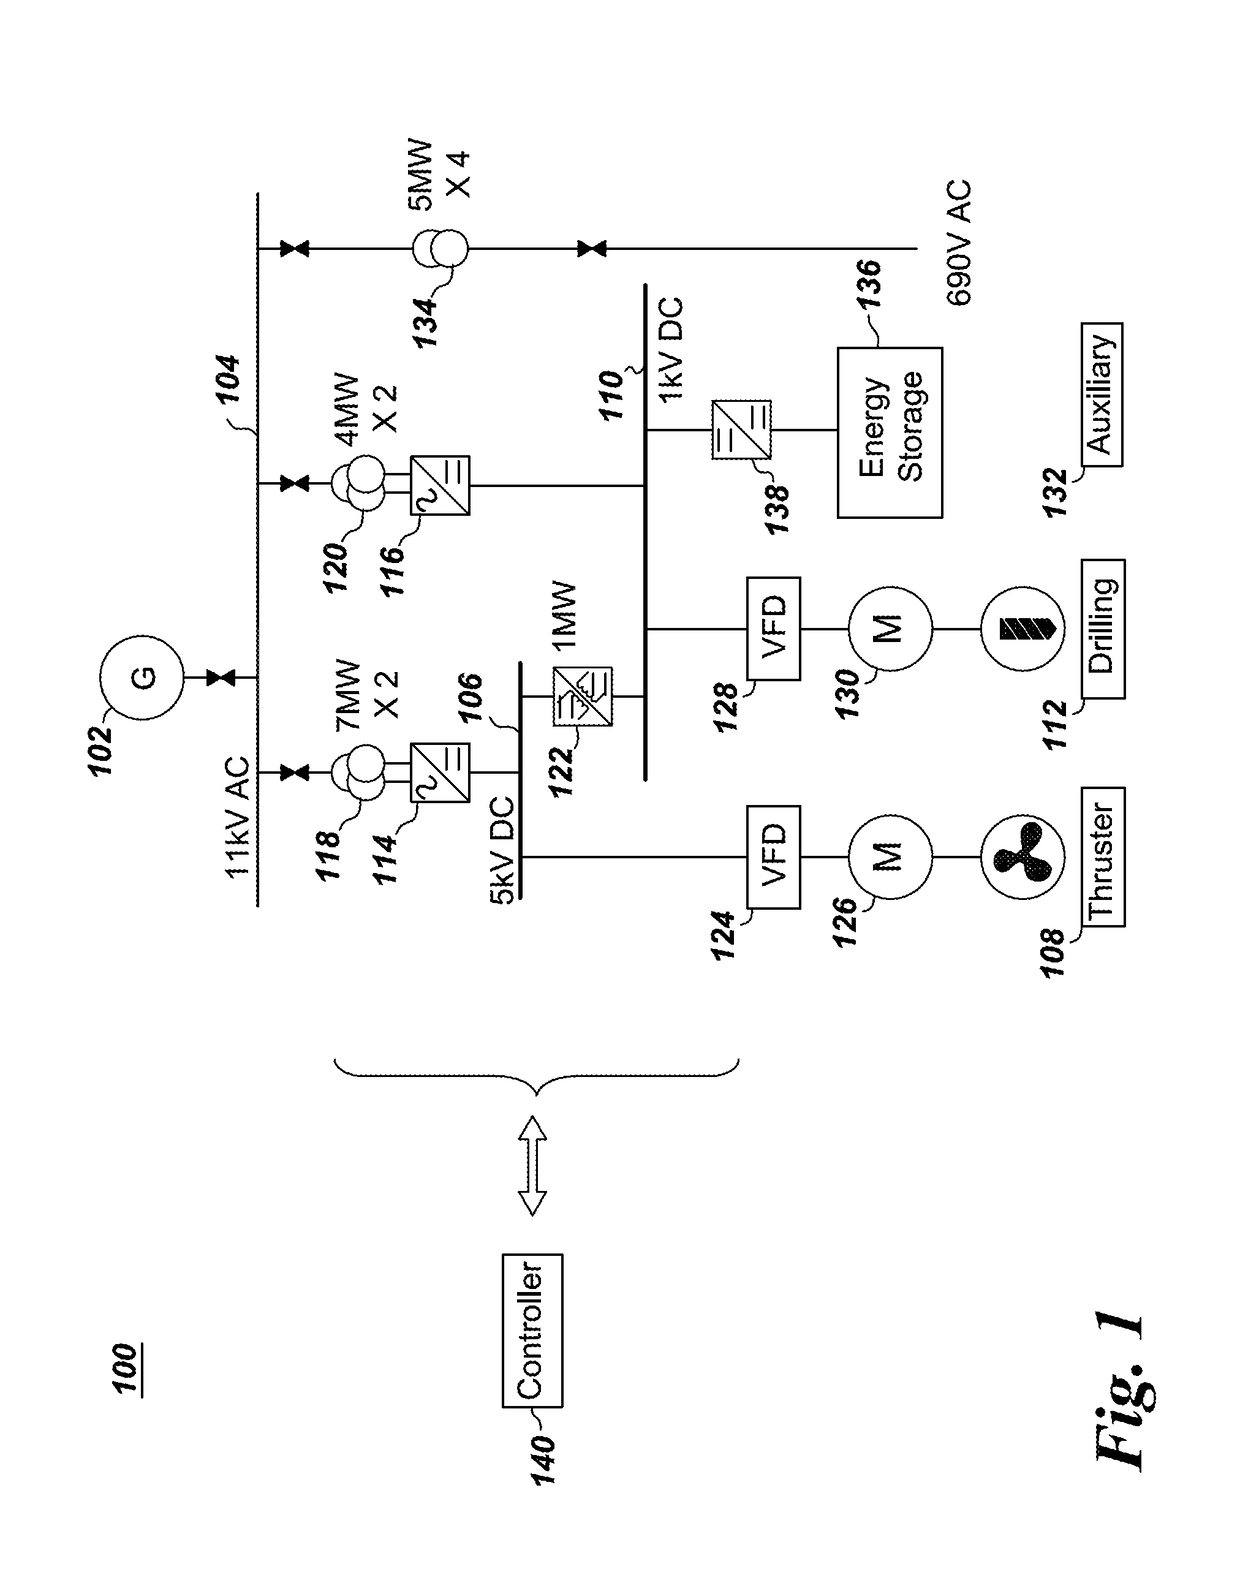 System and method for operating a DC to DC power converter